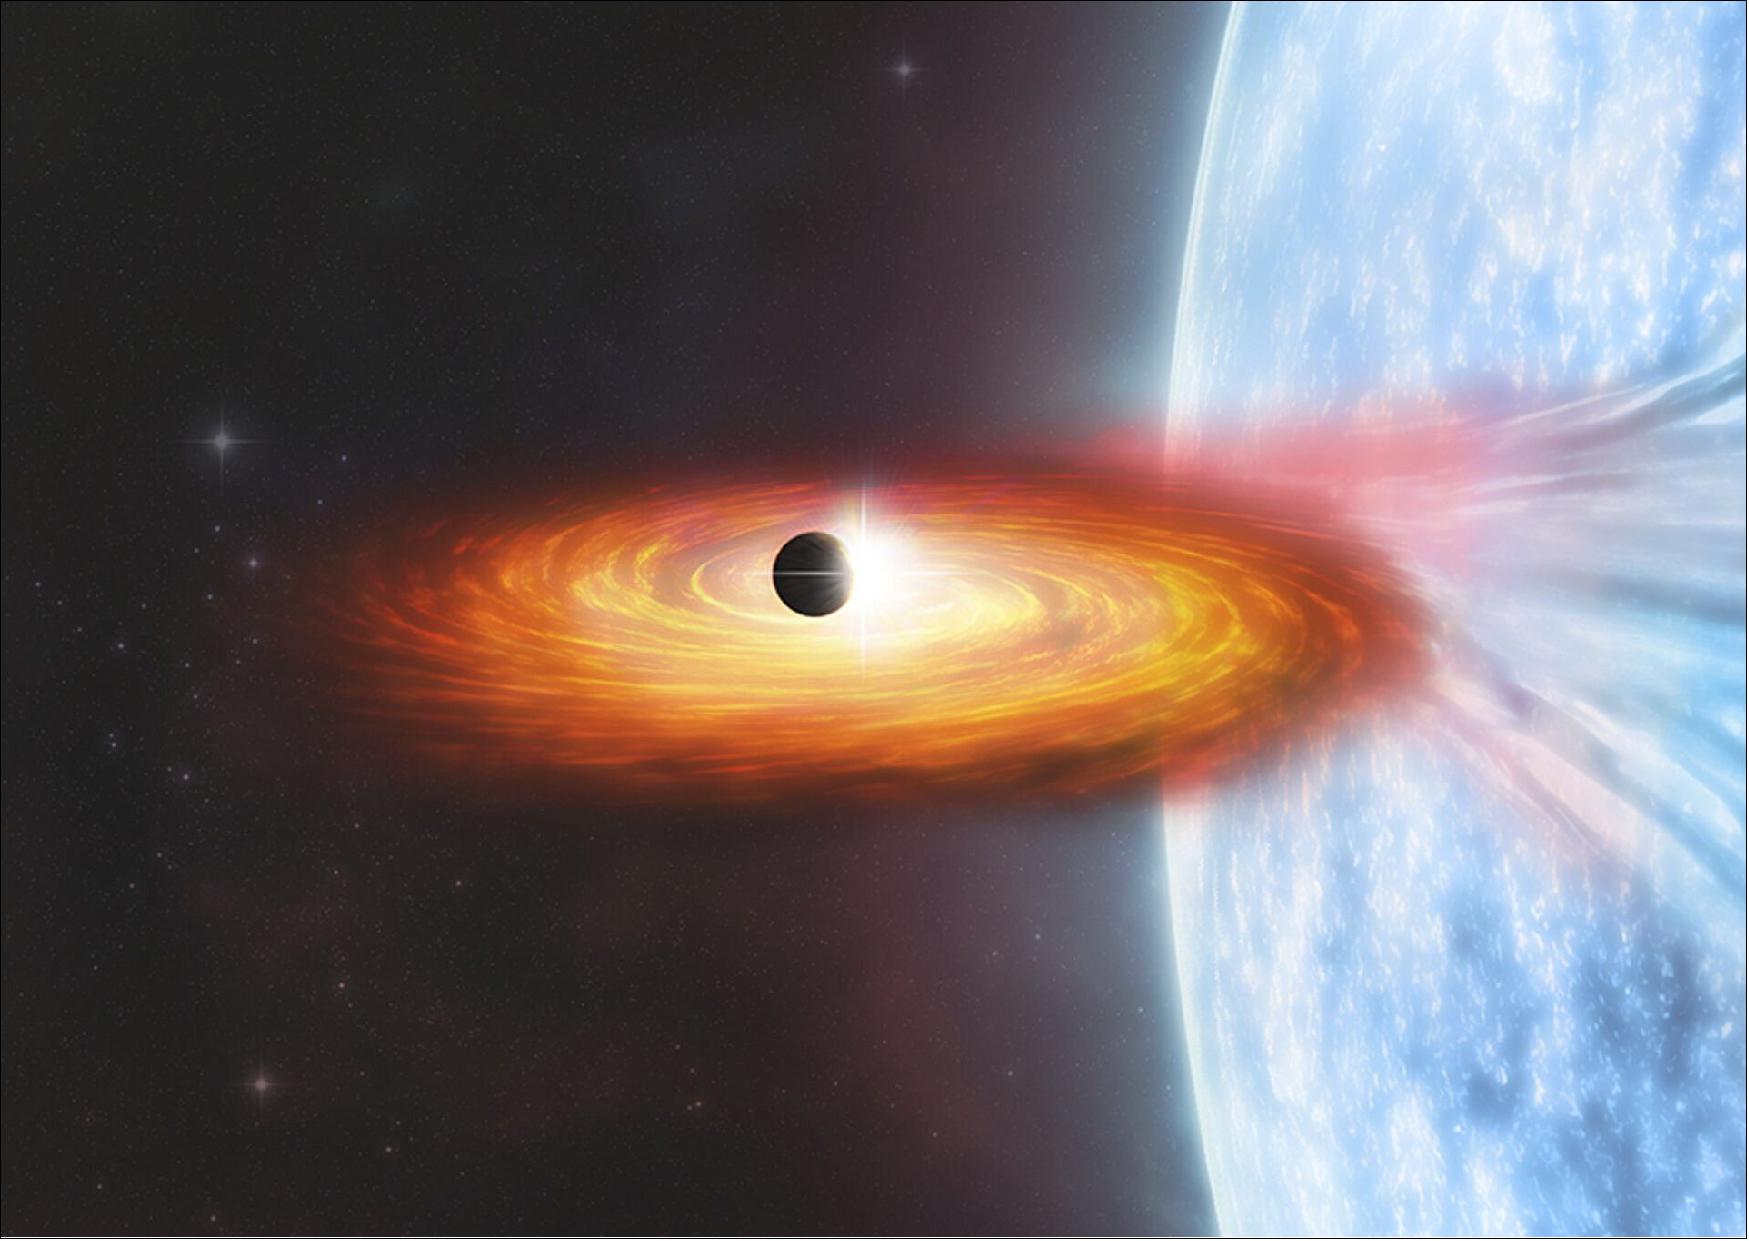 Figure 18: Illustration of X-ray binary with possible planet. Astronomers detected the temporary dimming of X-rays from a system where a massive star is in orbit around a neutron star or black hole (shown in the artist's illustration). This dimming is interpreted as being a planet that passed in front of an X-ray source around the neutron star or black hole (image credit: NASA/CXC/M. Weiss)